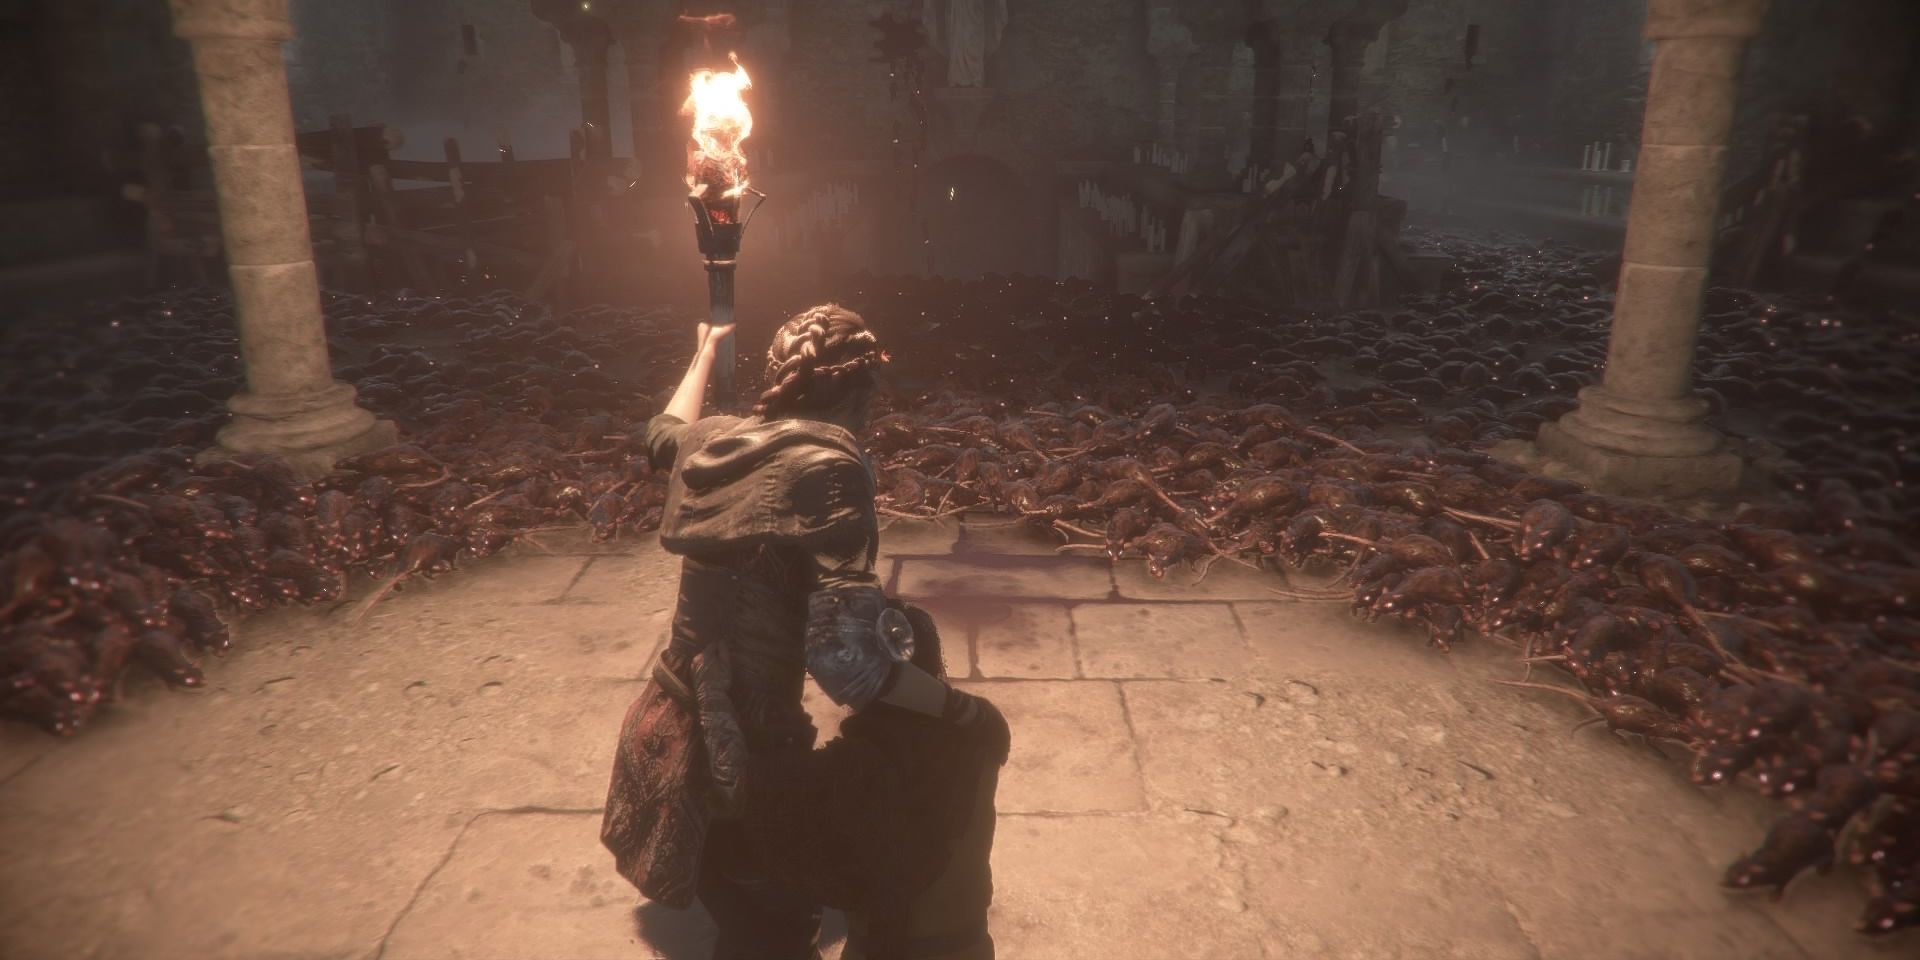 Amica de Lune protects her brother Hugo from an army of rats in A Plague's Tale Innocence